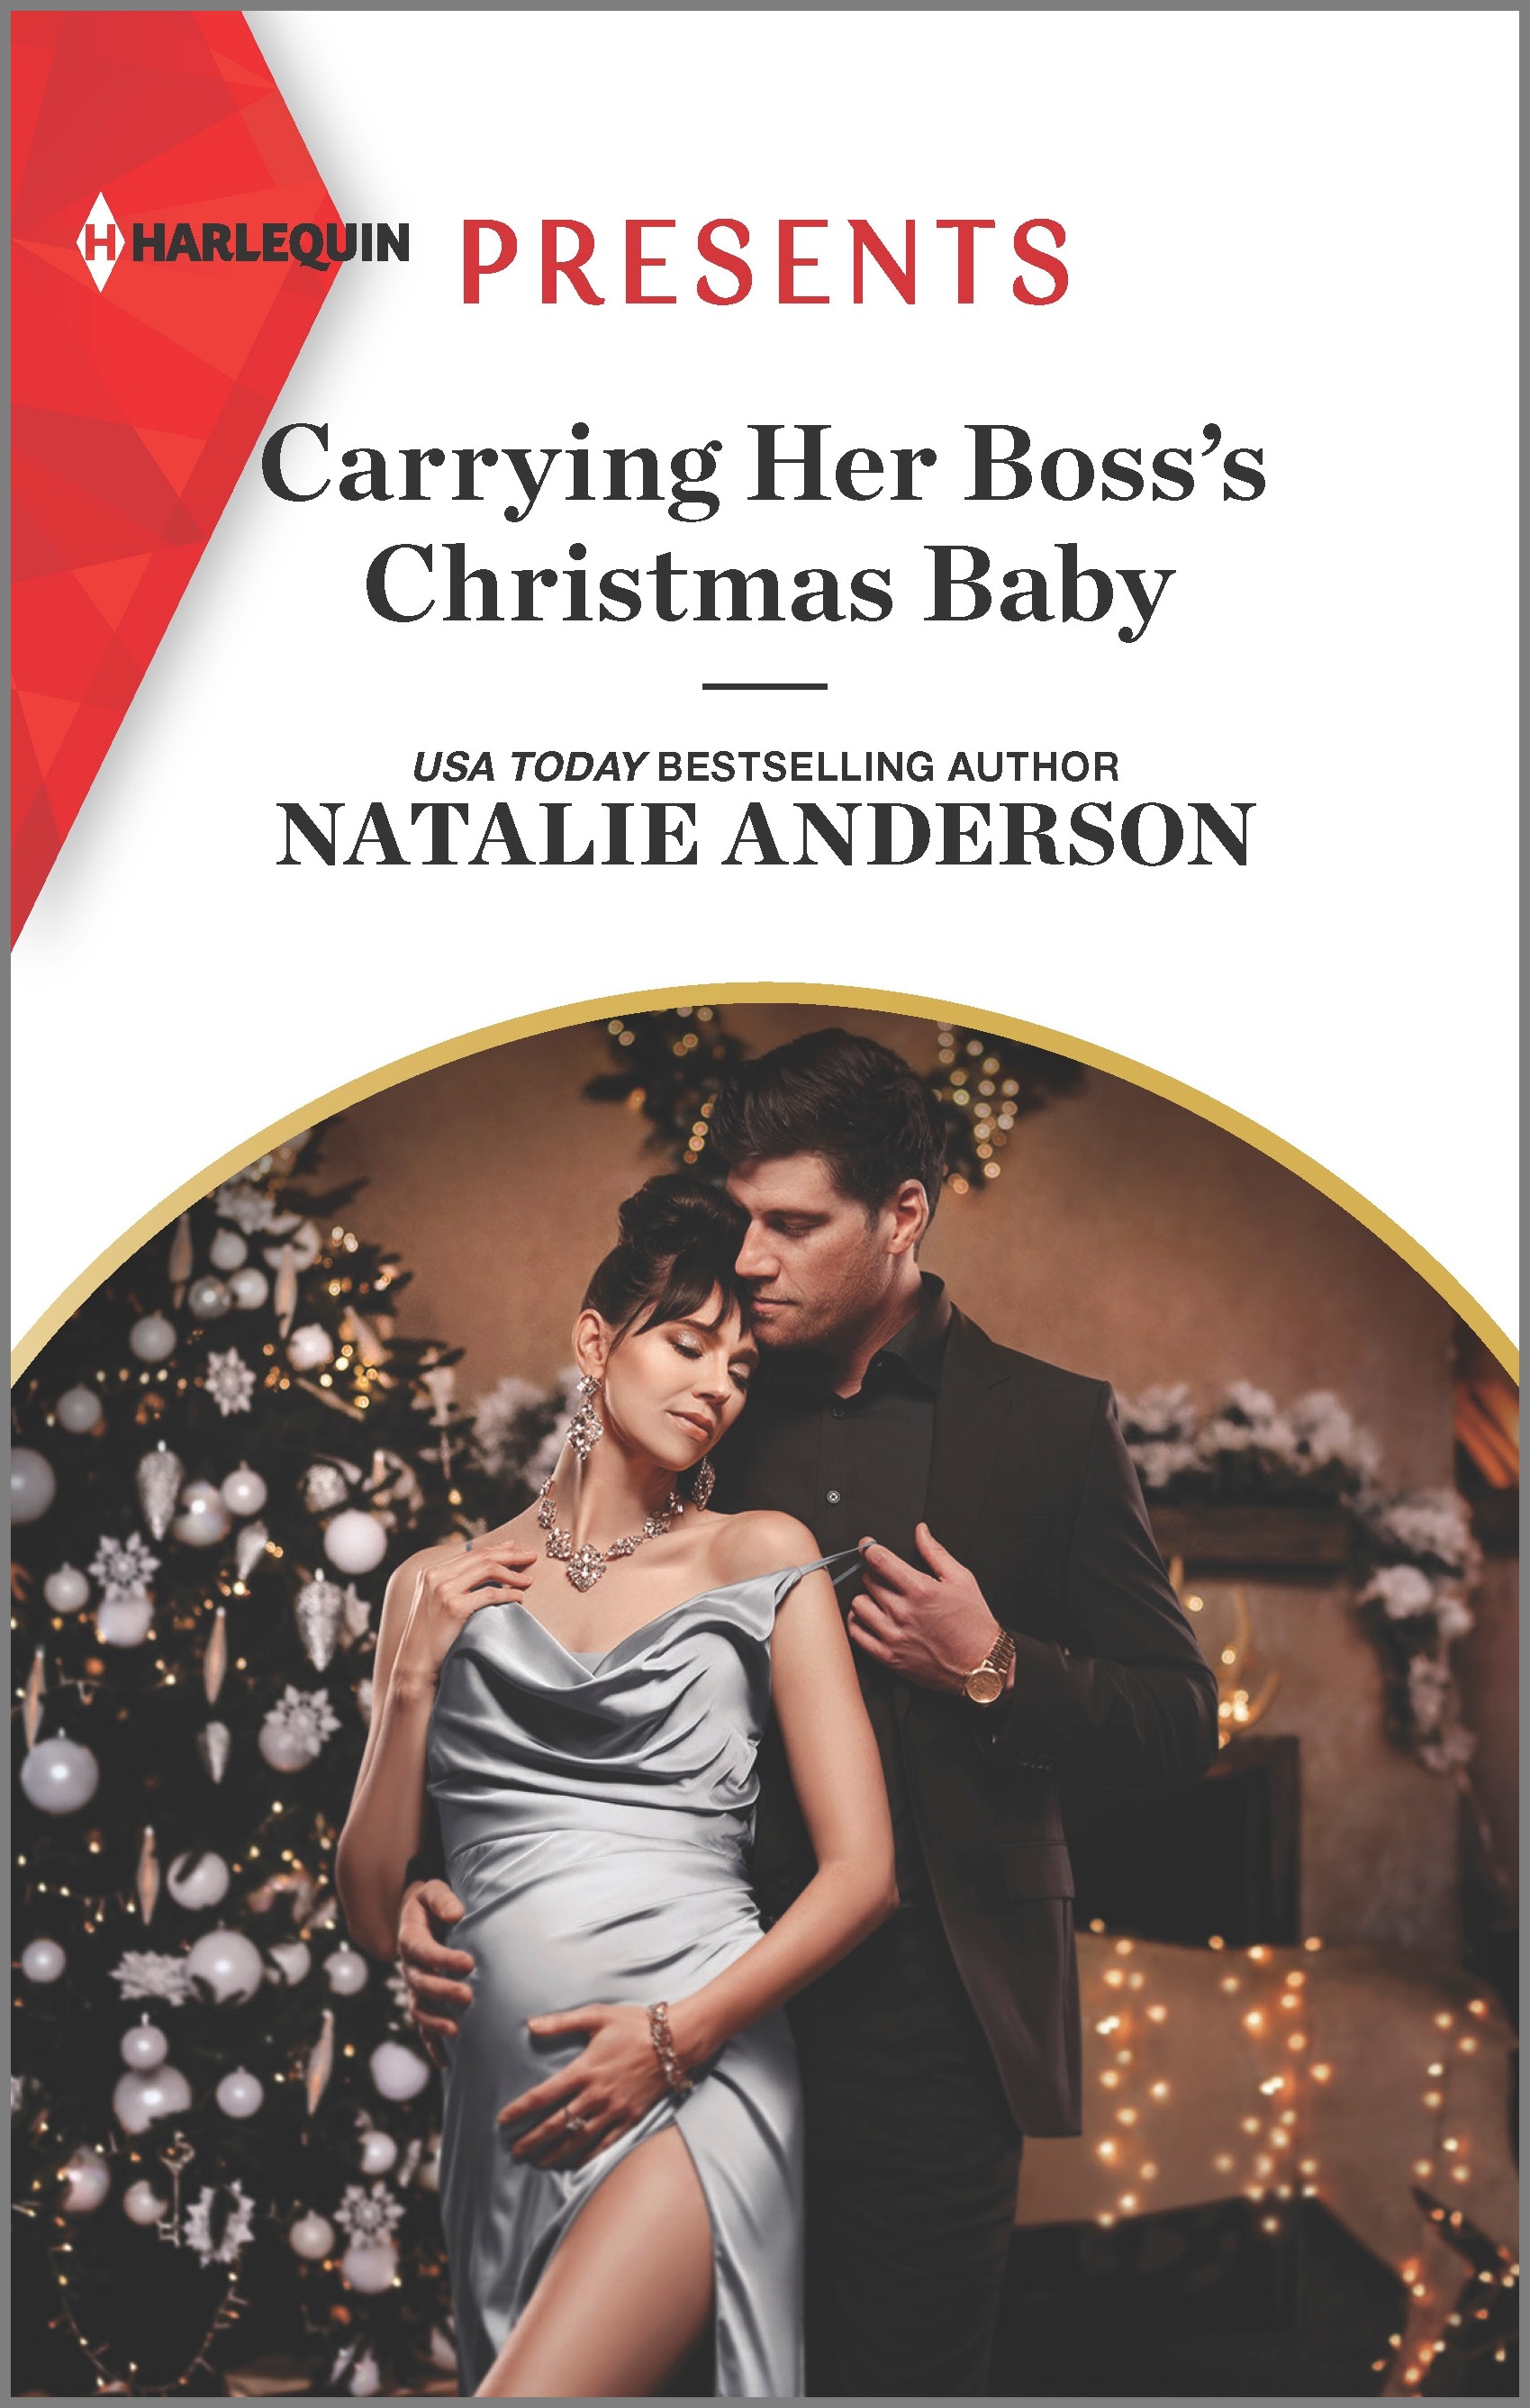 CARRYING HER BOSS'S CHRISTMAS BABY by Natalie Anderson